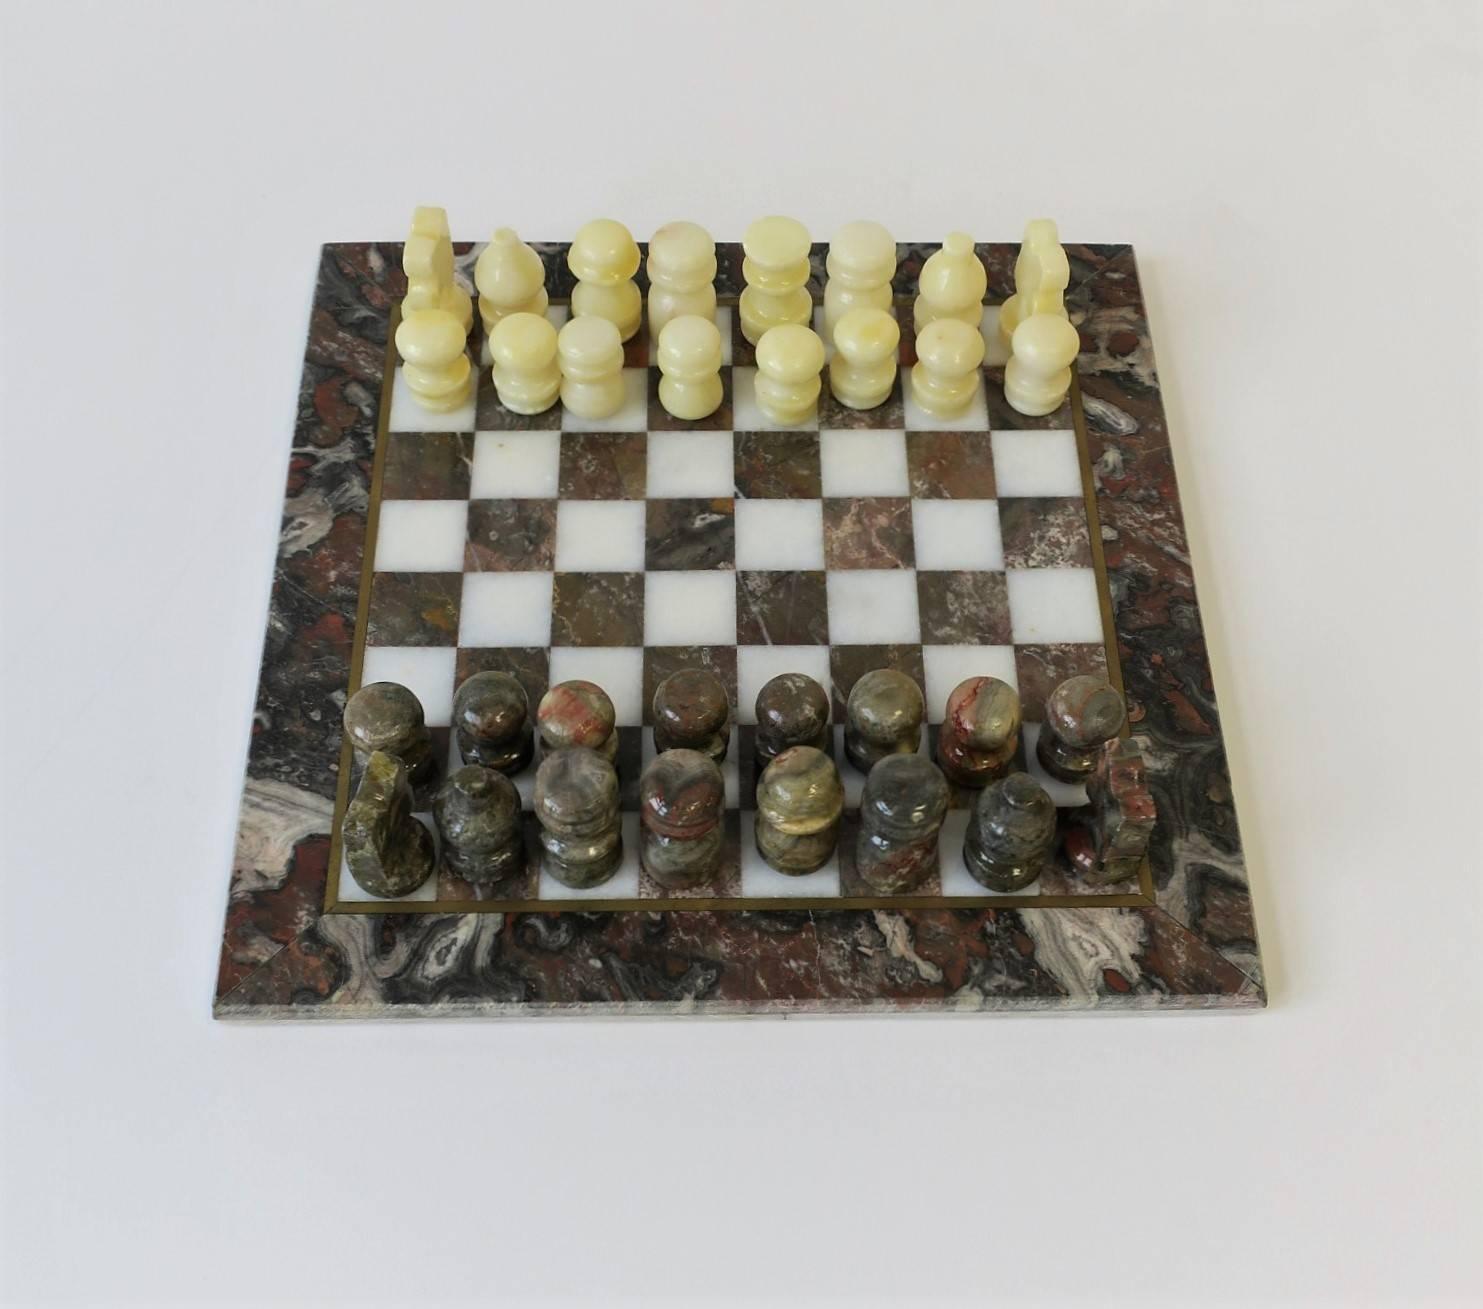 A marble and brass chess game set, ca. 1970s. Marble game board has a beautiful brass inlaid trim and marble colors that include: white and a marble combo of white/blue/grey and red/burgundy/ox blood hues. 'White' game pieces are lacquered alabaster